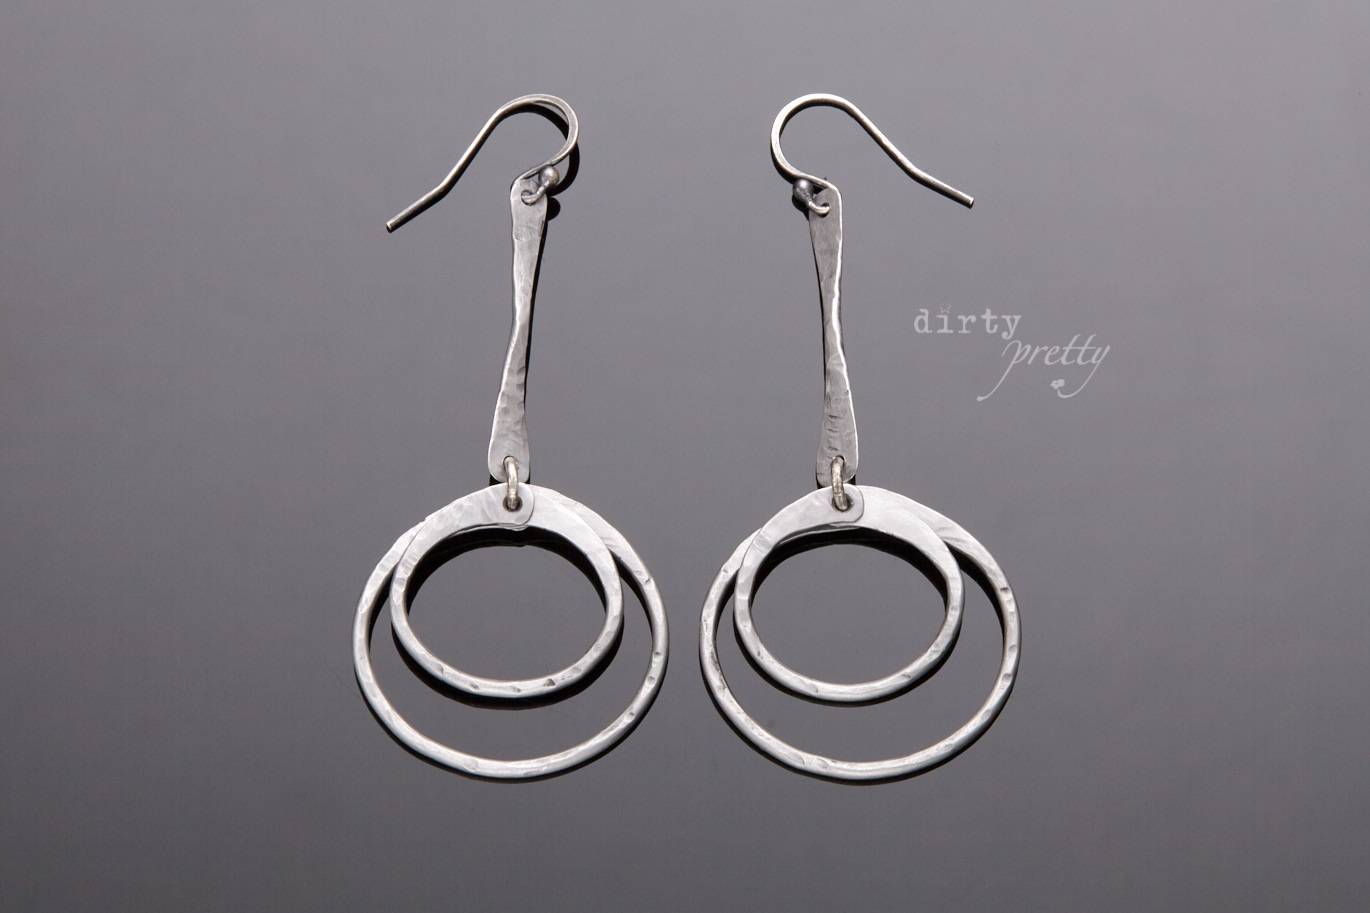 Christmas Gifts for Wife - Double Happiness Steel Earrings by dirtypretty artwear - rustic jewelry